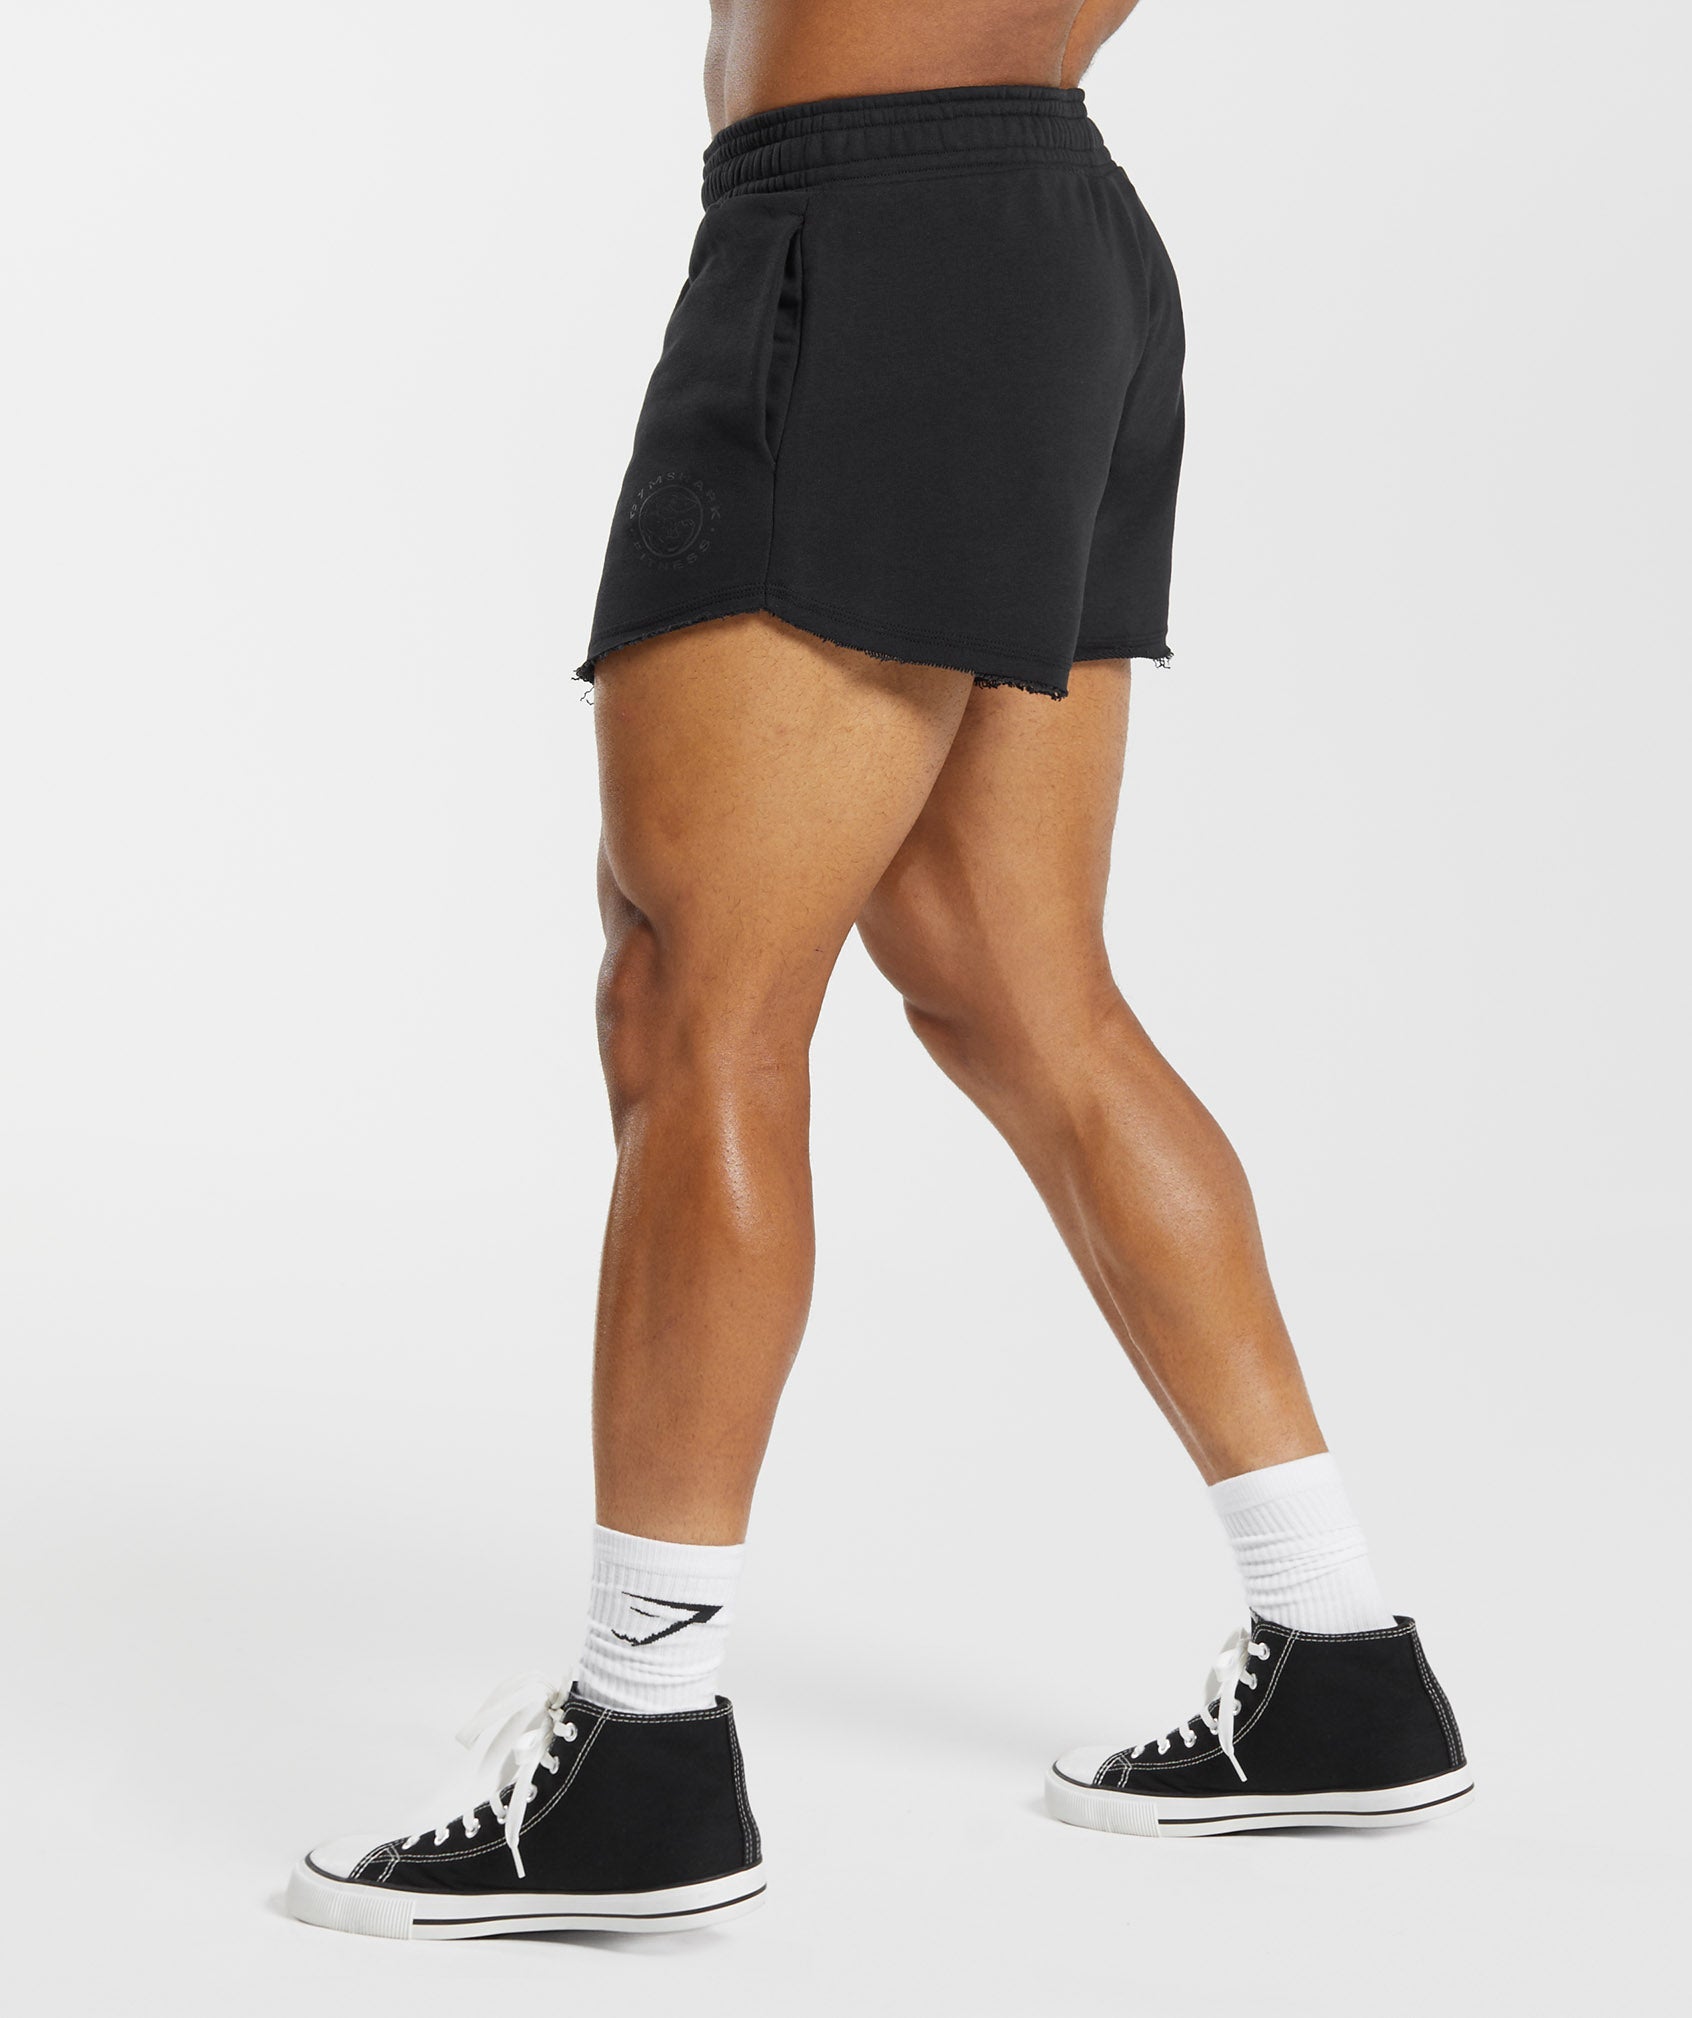 Legacy 4" Shorts in Black - view 3